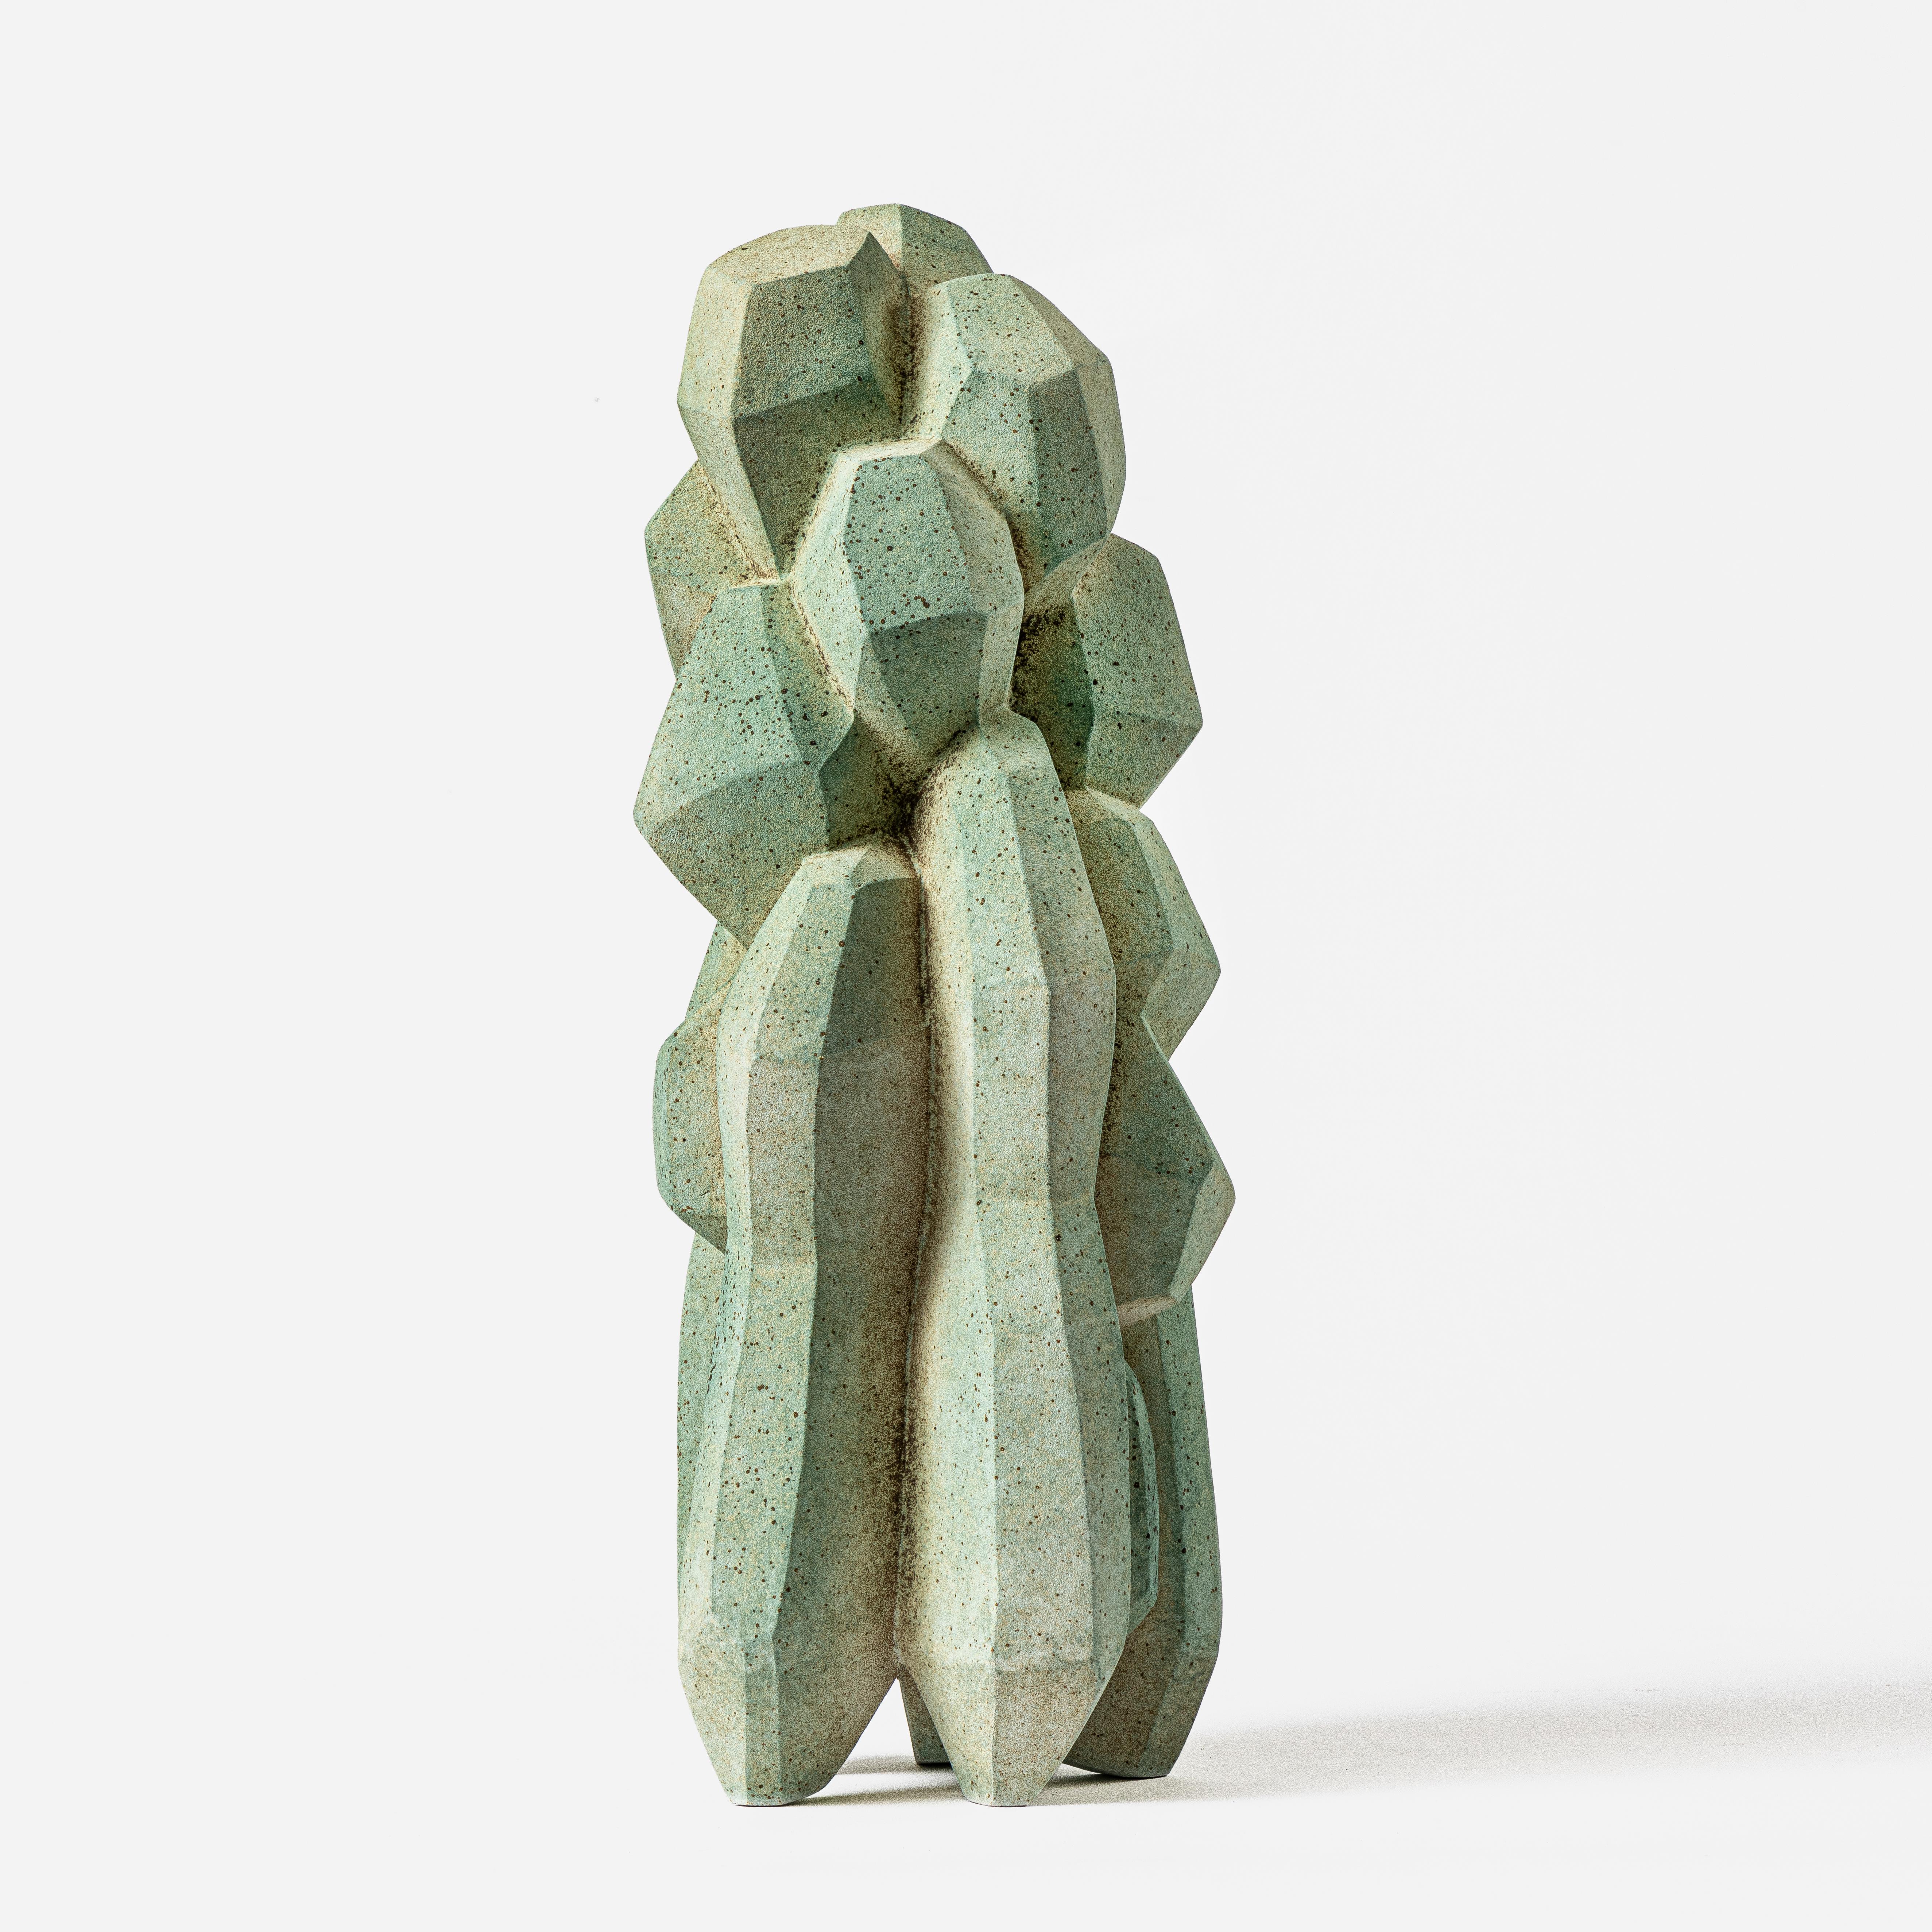 Upward Movement, 2023, (Ceramic, C. 16.9 in. h x 7.1 in. w x 6.3 in. d, Object No.: 4154)

Turi Heisselberg Pedersen consistently strives to manifest the vessel as a testament to abstract form and as a standalone sculptural object. In her interplay